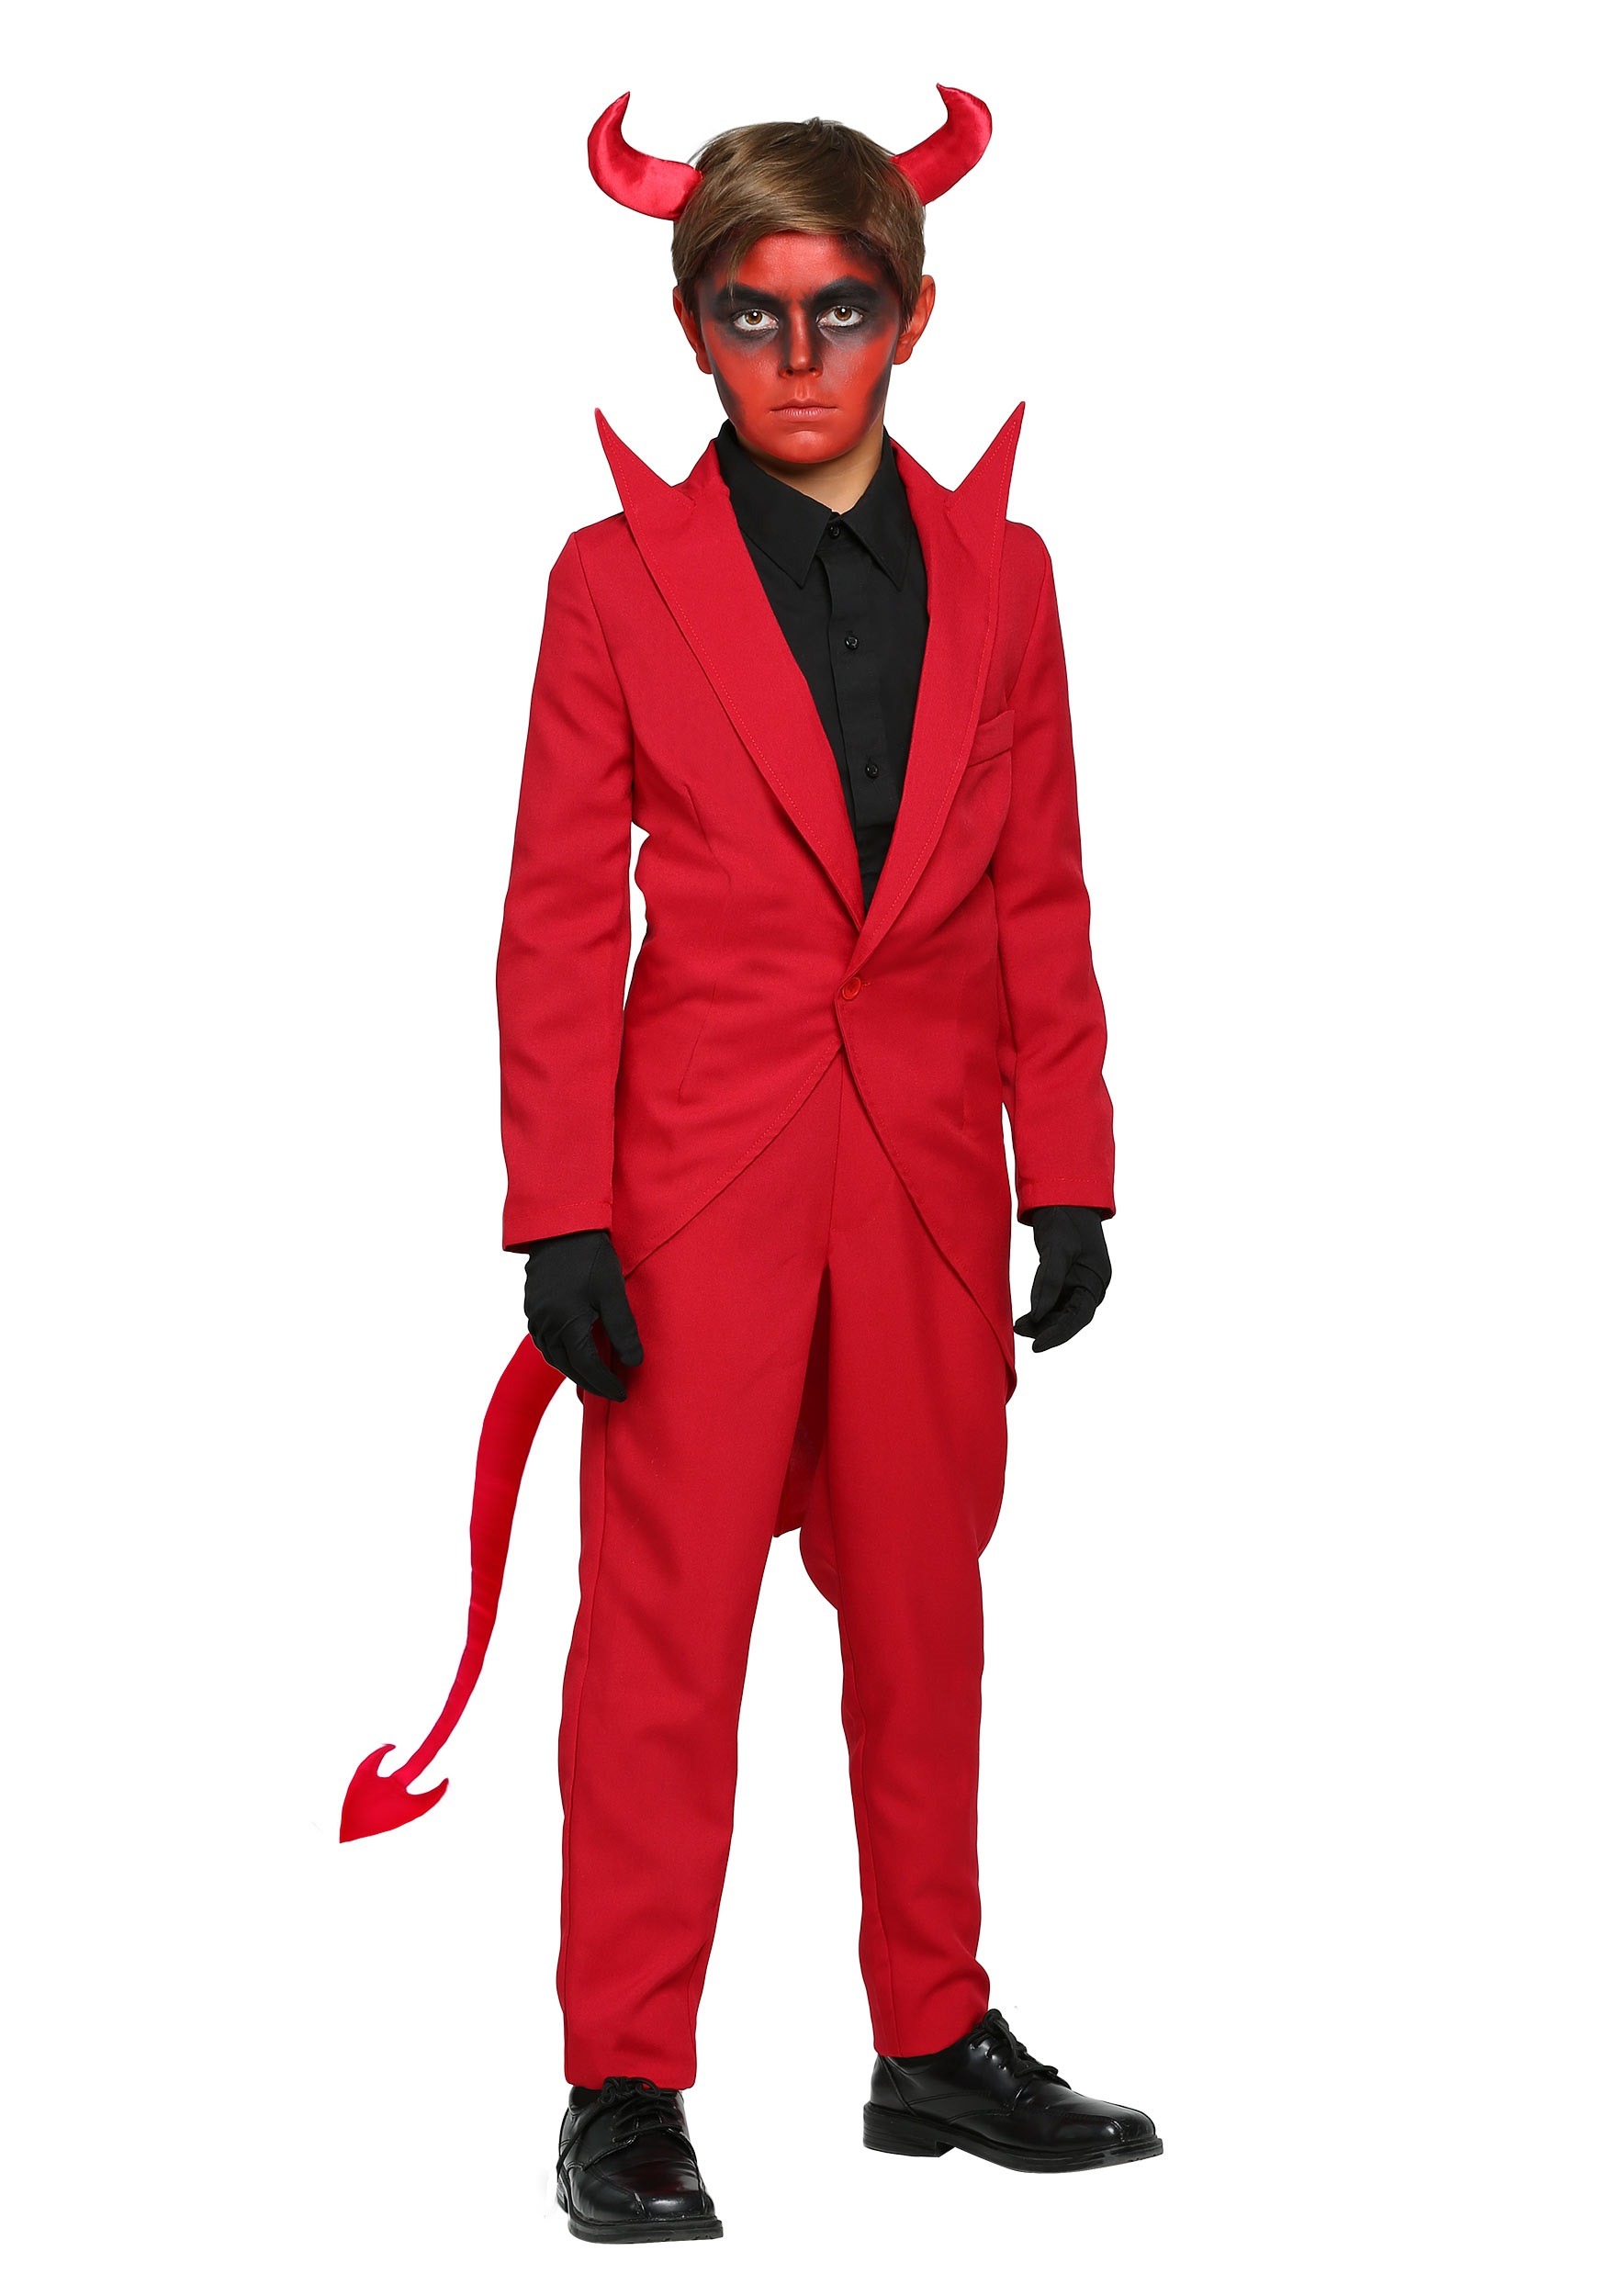 Photos - Fancy Dress FUN Costumes Red Suit Devil Costume for Kids Red FUN2344CH